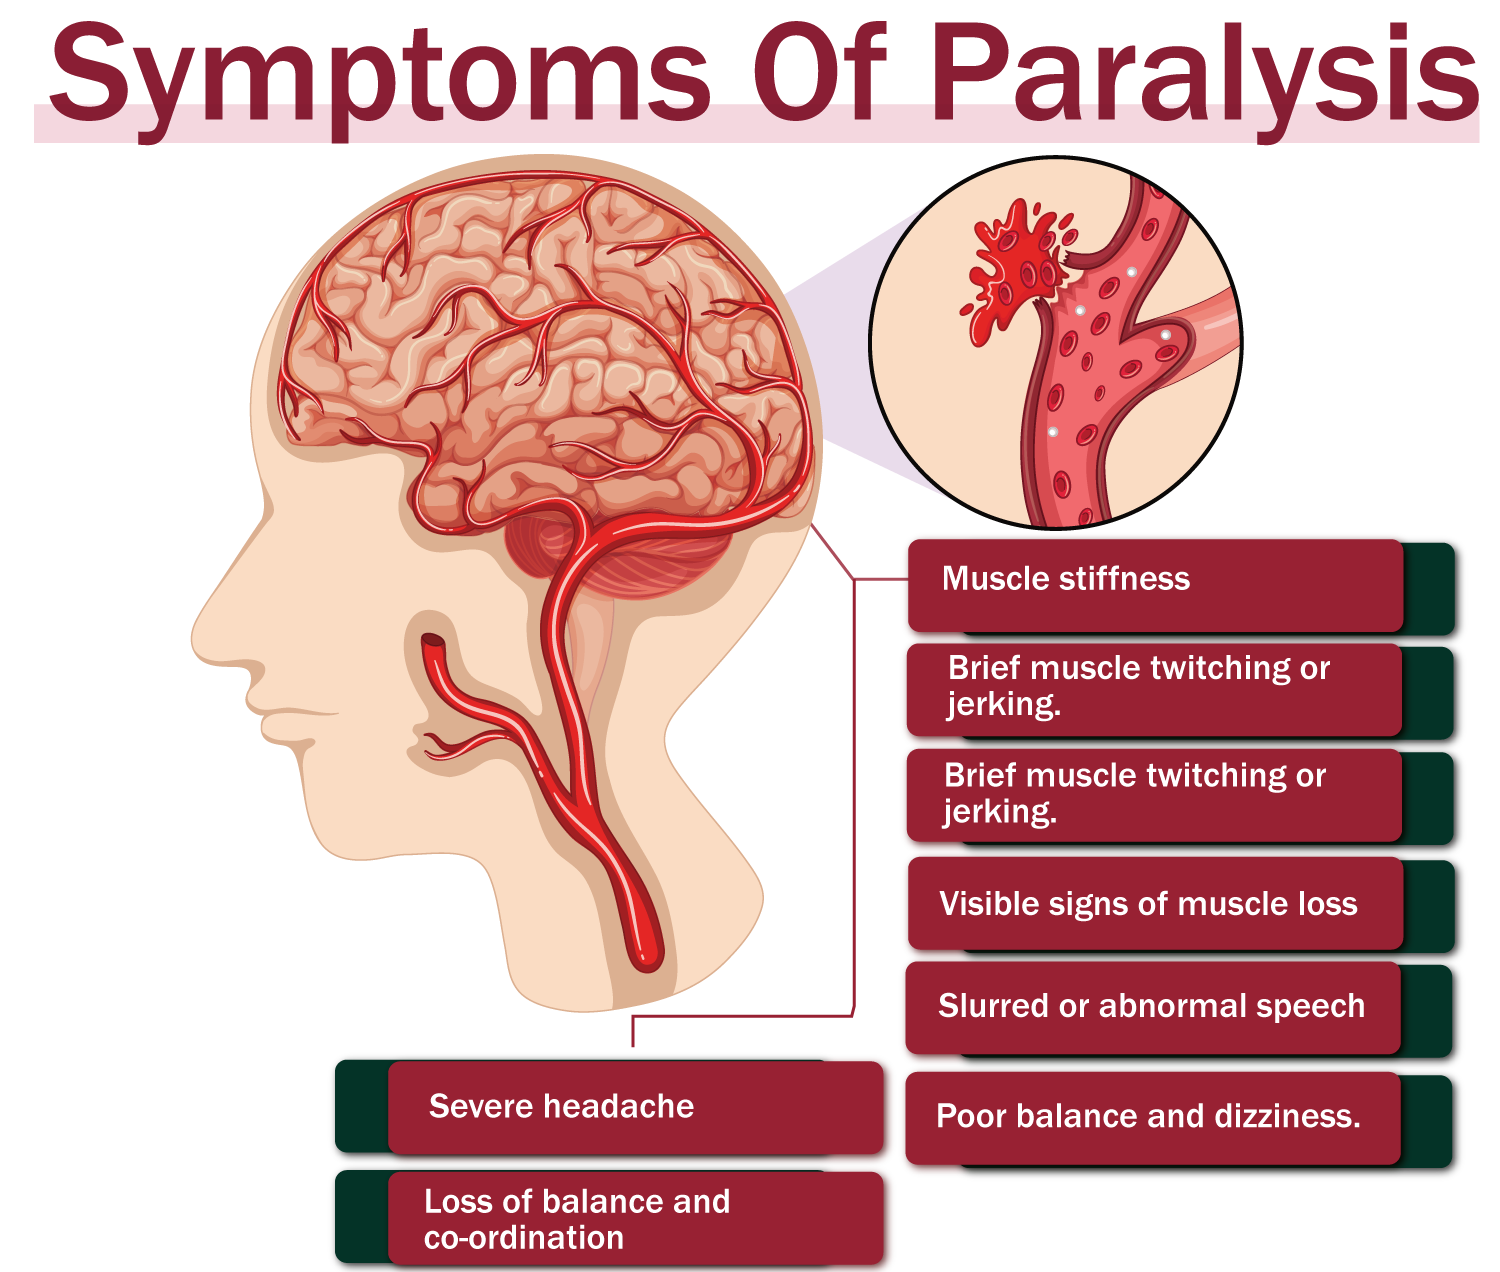 paralysis and speech problems are associated with which condition